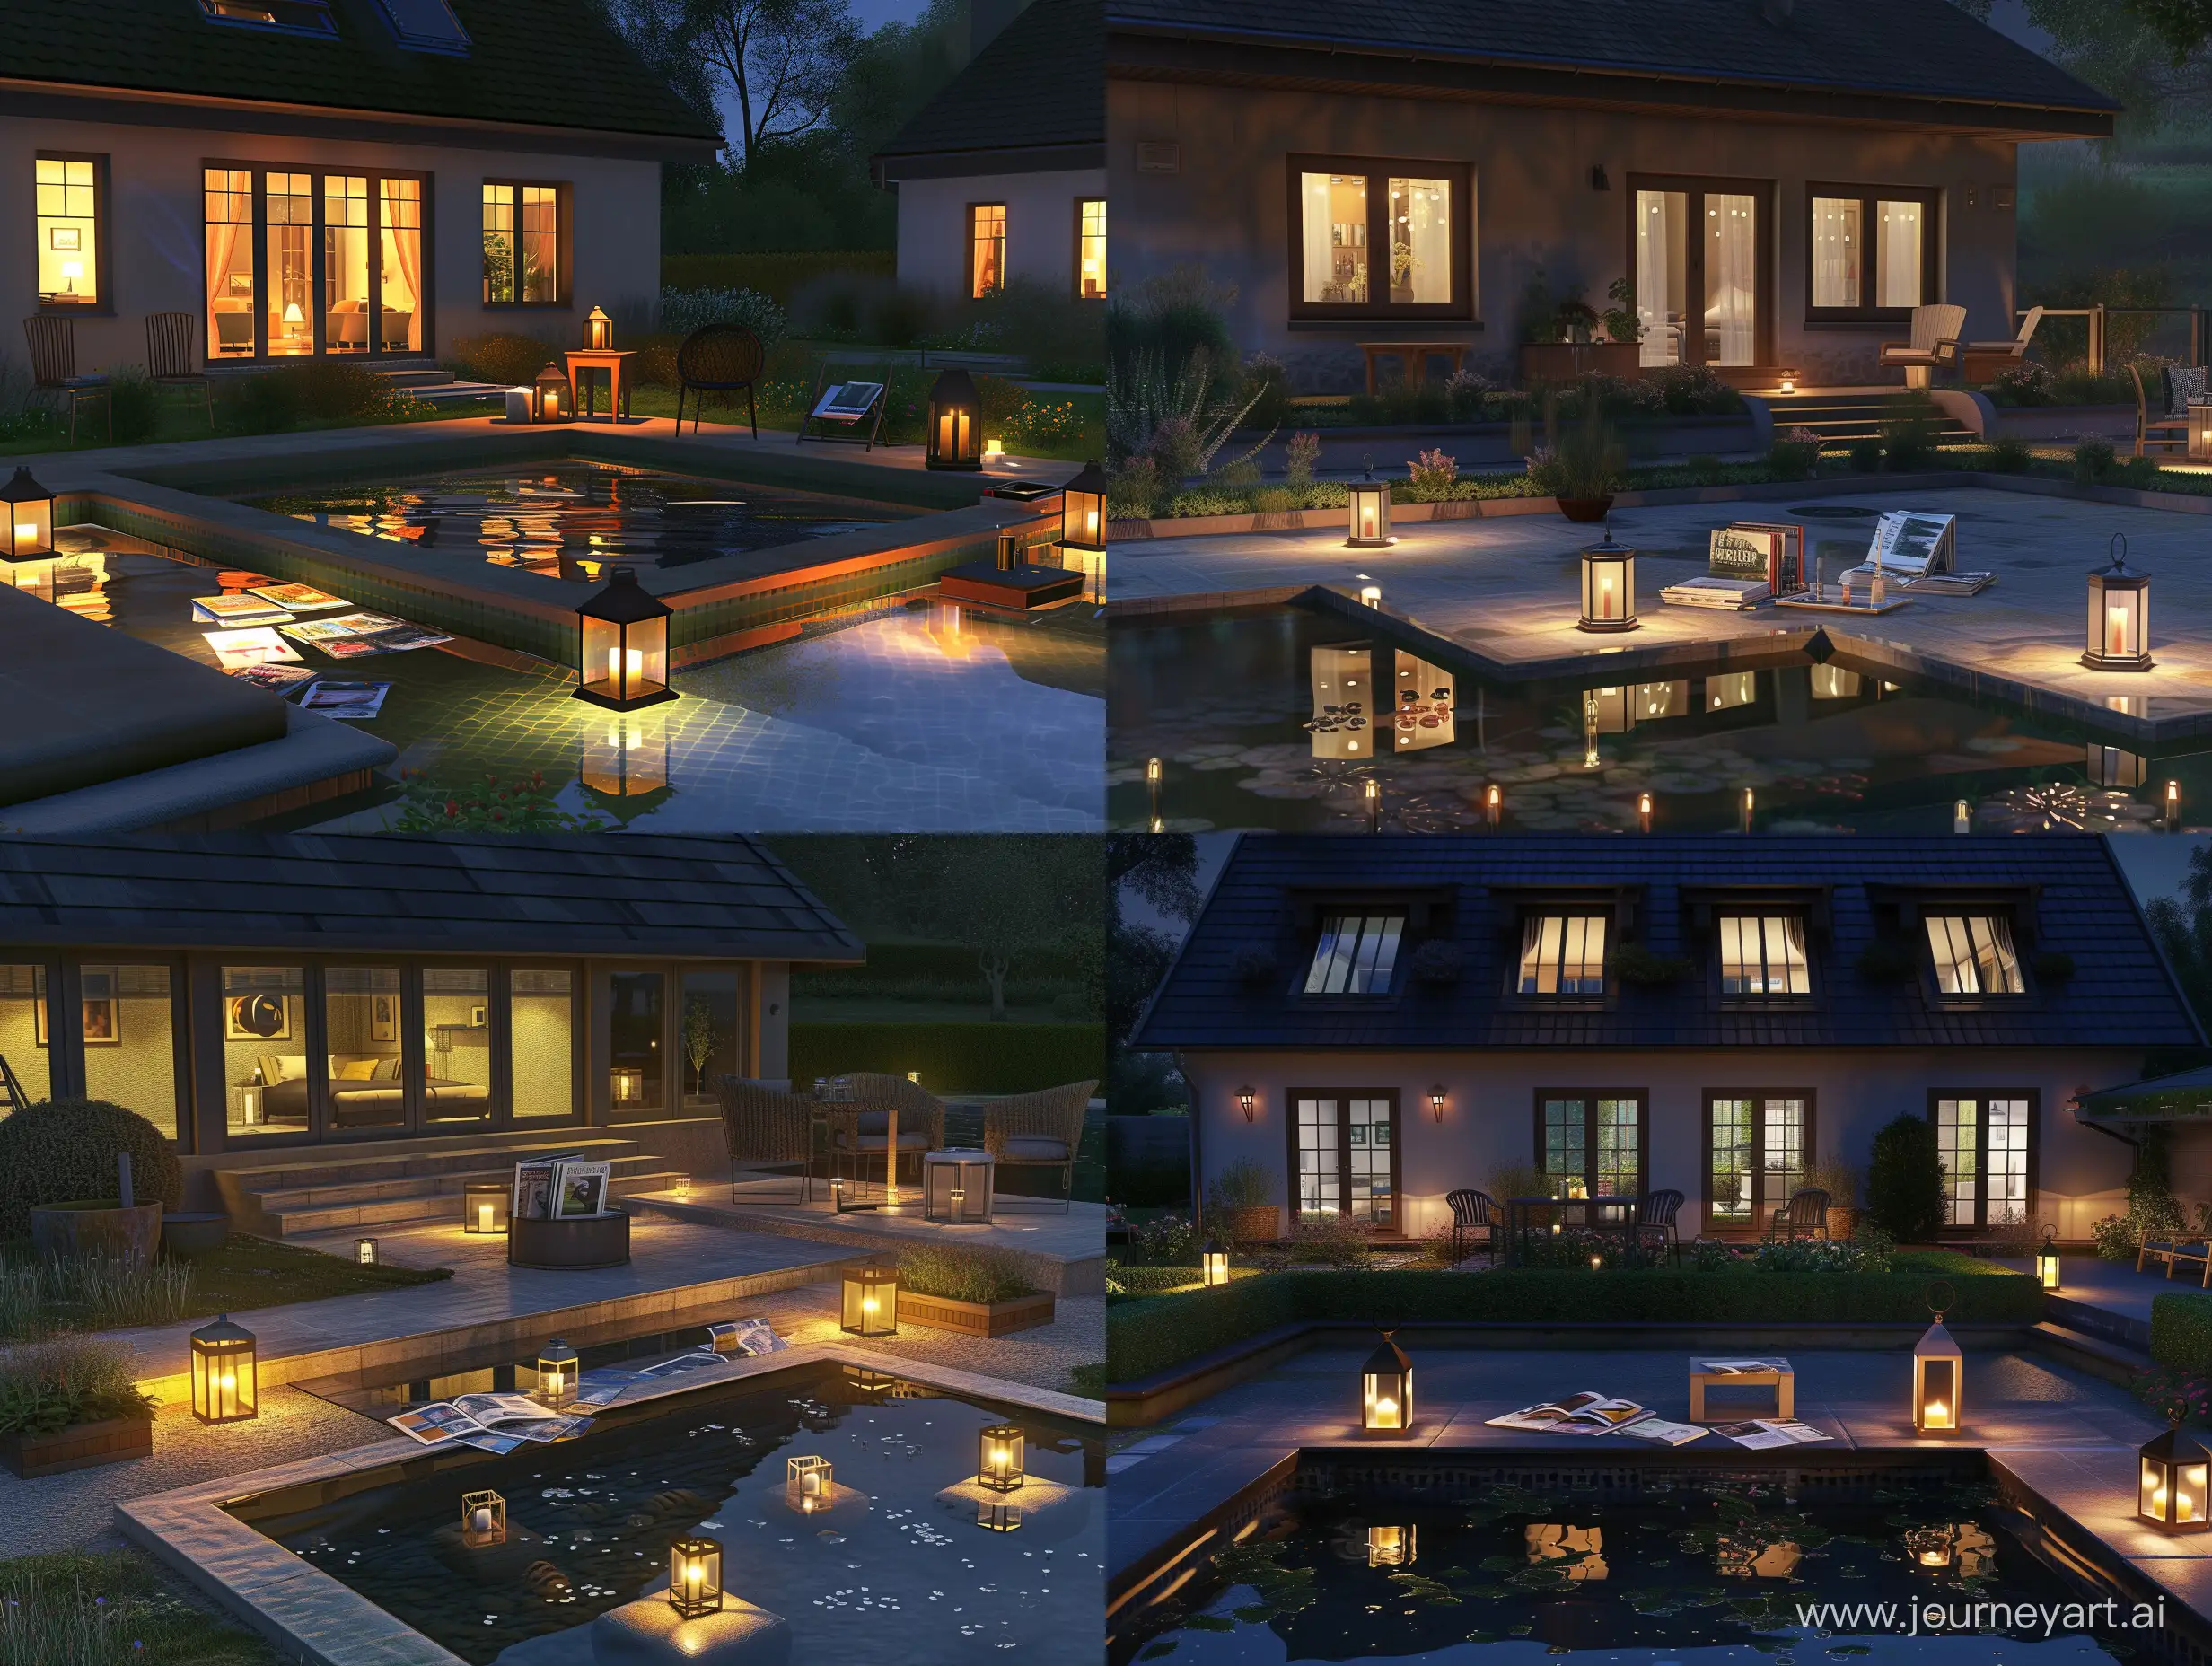 beautiful american style house with a roof, and windows, at night. a backyard with gardens, and small swimming pool, with edging and small steps. modern lanterns reflecting in the transparent water. near is a little table with magazines and candles. there are two chairs near the table. 8 to ultrarealism, unreal engine, clear objects, beautiful night skies